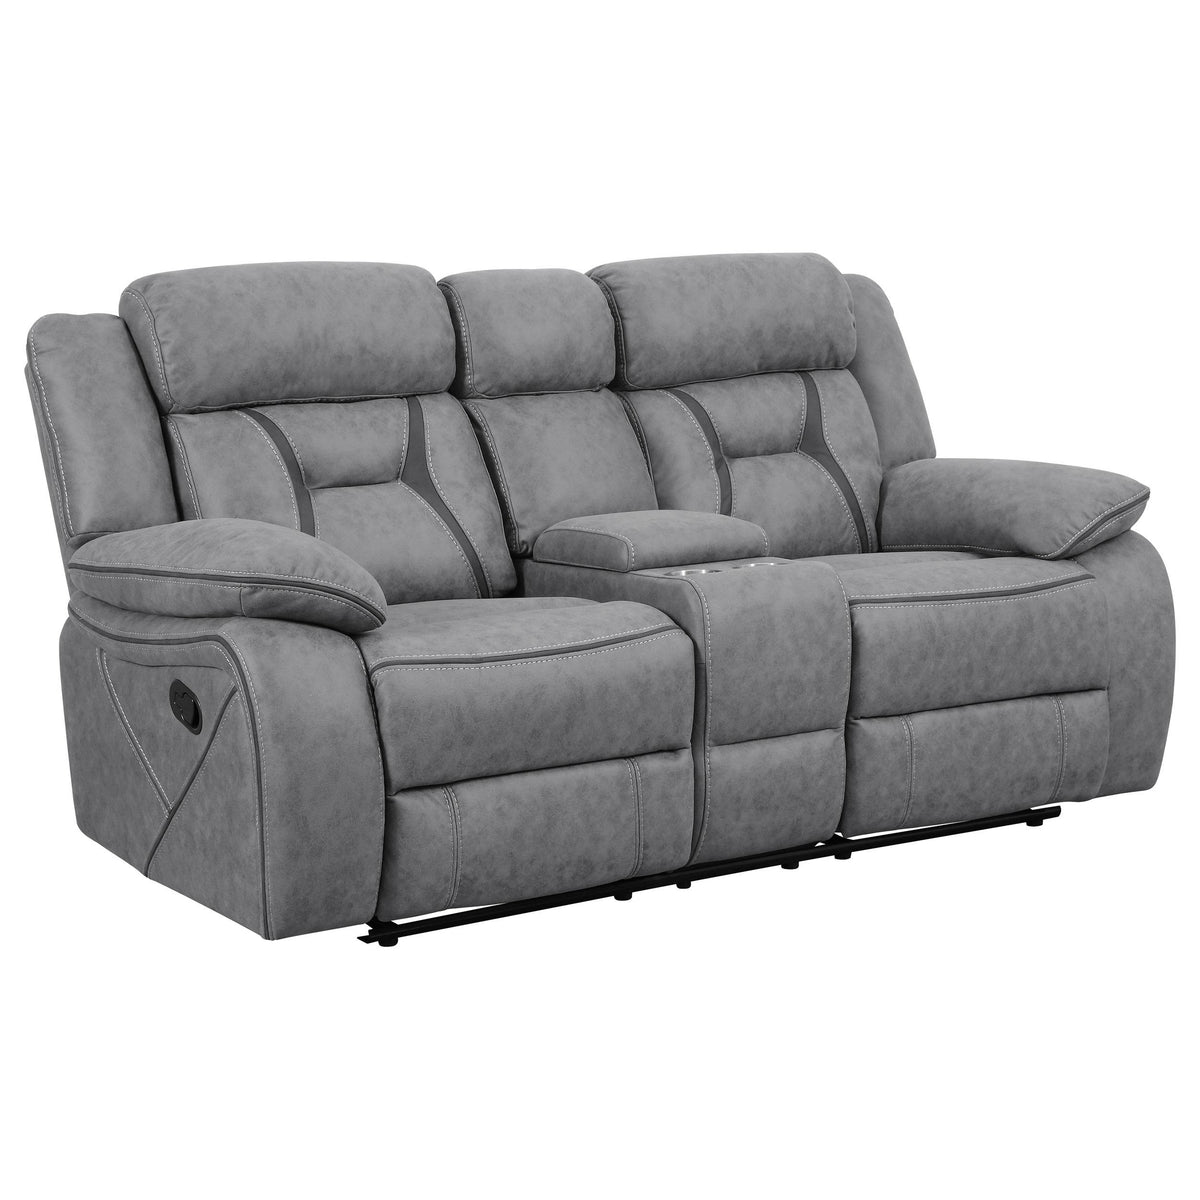 Higgins Pillow Top Arm Motion Loveseat with Console Grey Higgins Pillow Top Arm Motion Loveseat with Console Grey Half Price Furniture